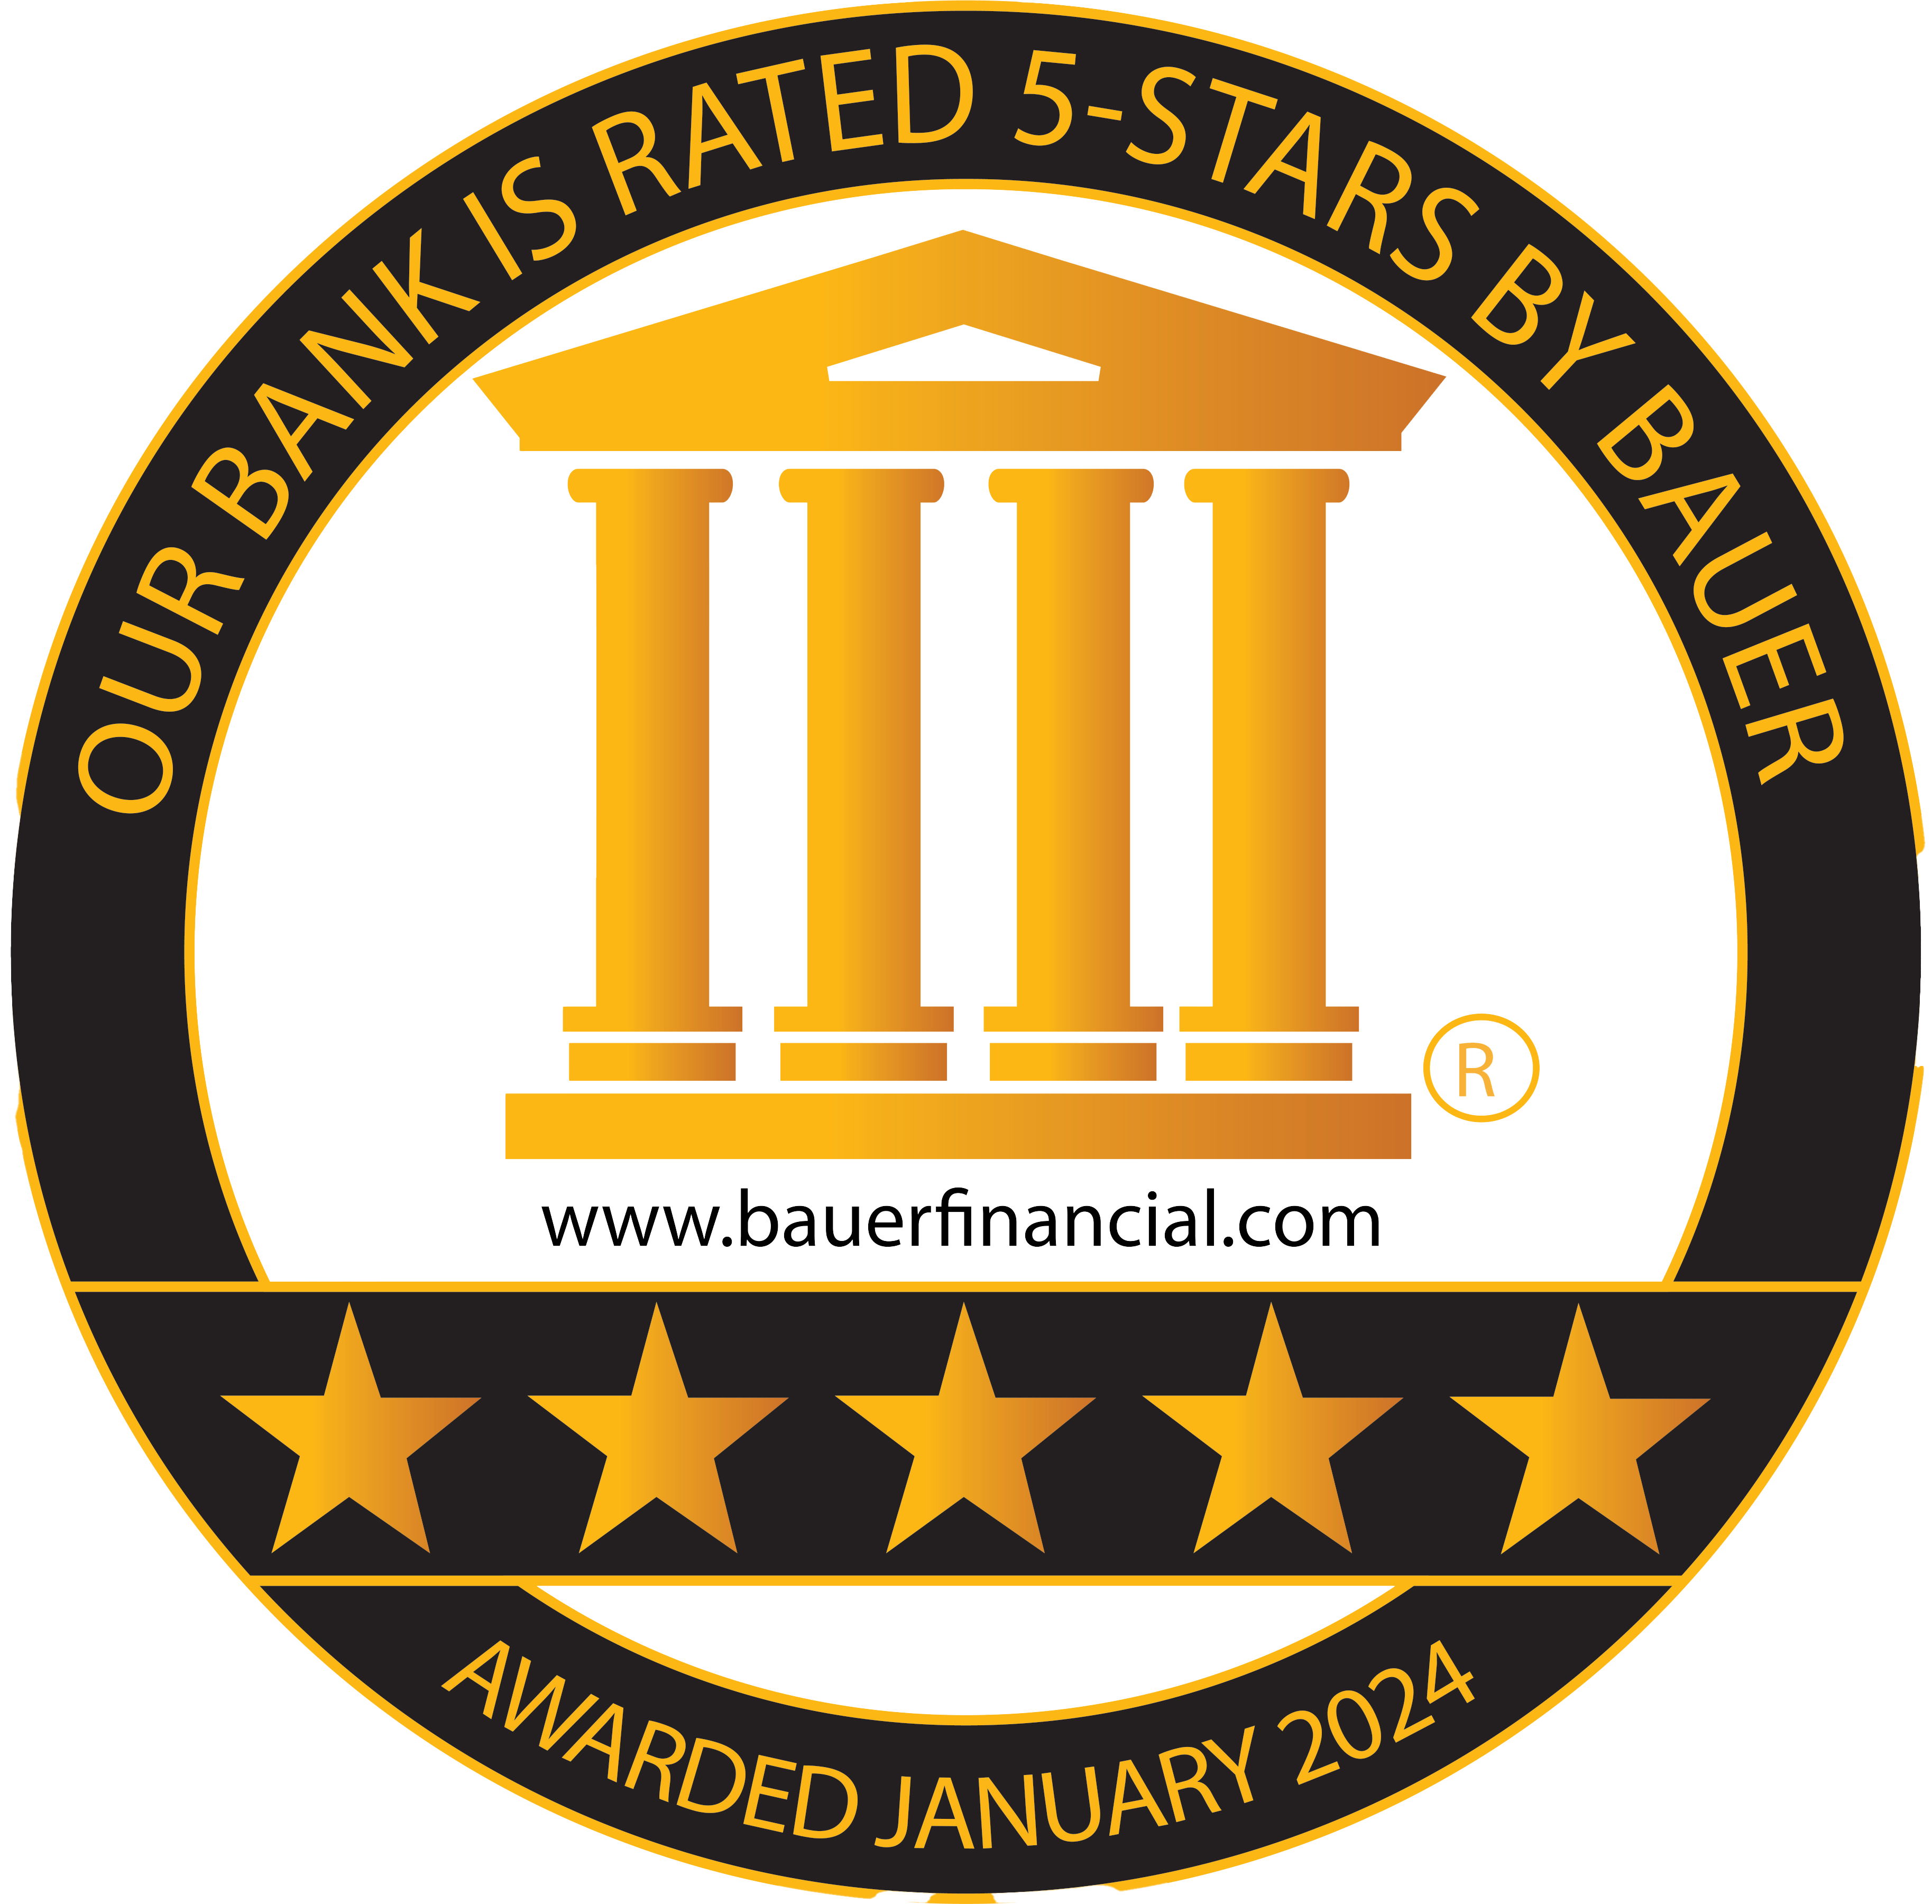 Our bank is rated 5 stars by BAUER